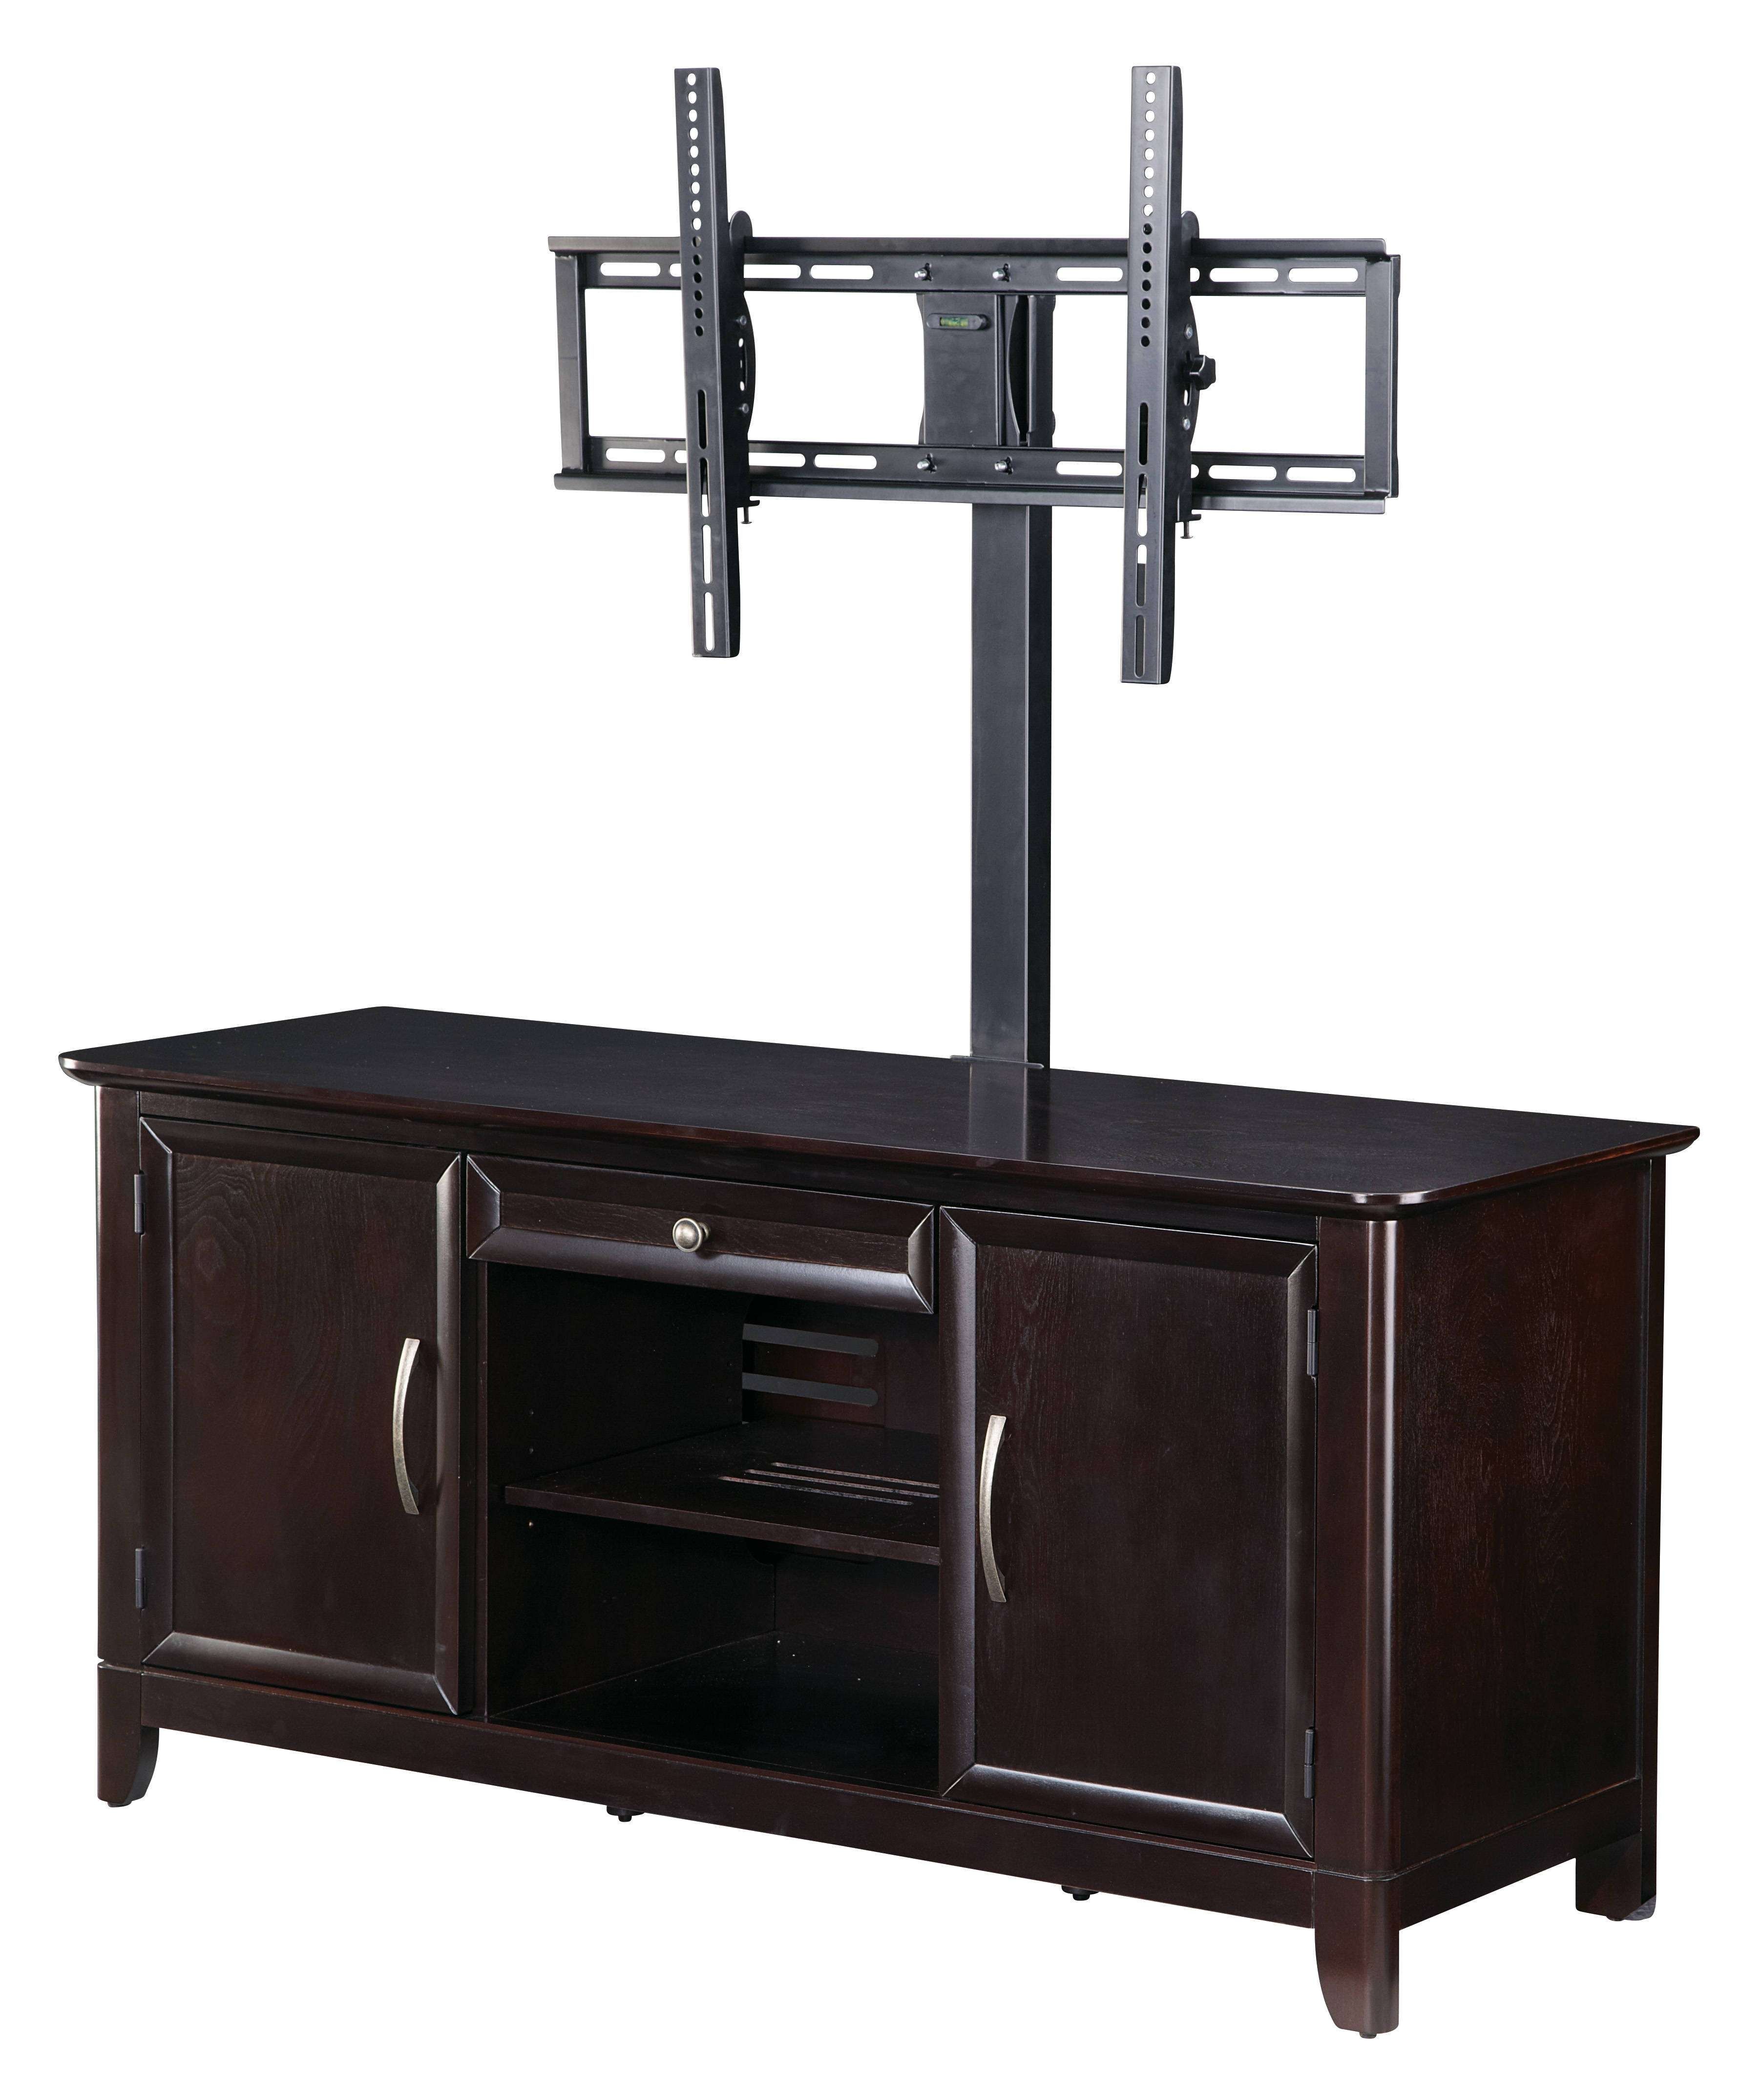 Rectangle White Tv Stand With Glass Shelves And Swivel Mount On Throughout Tv Stands Swivel Mount (Gallery 5 of 15)